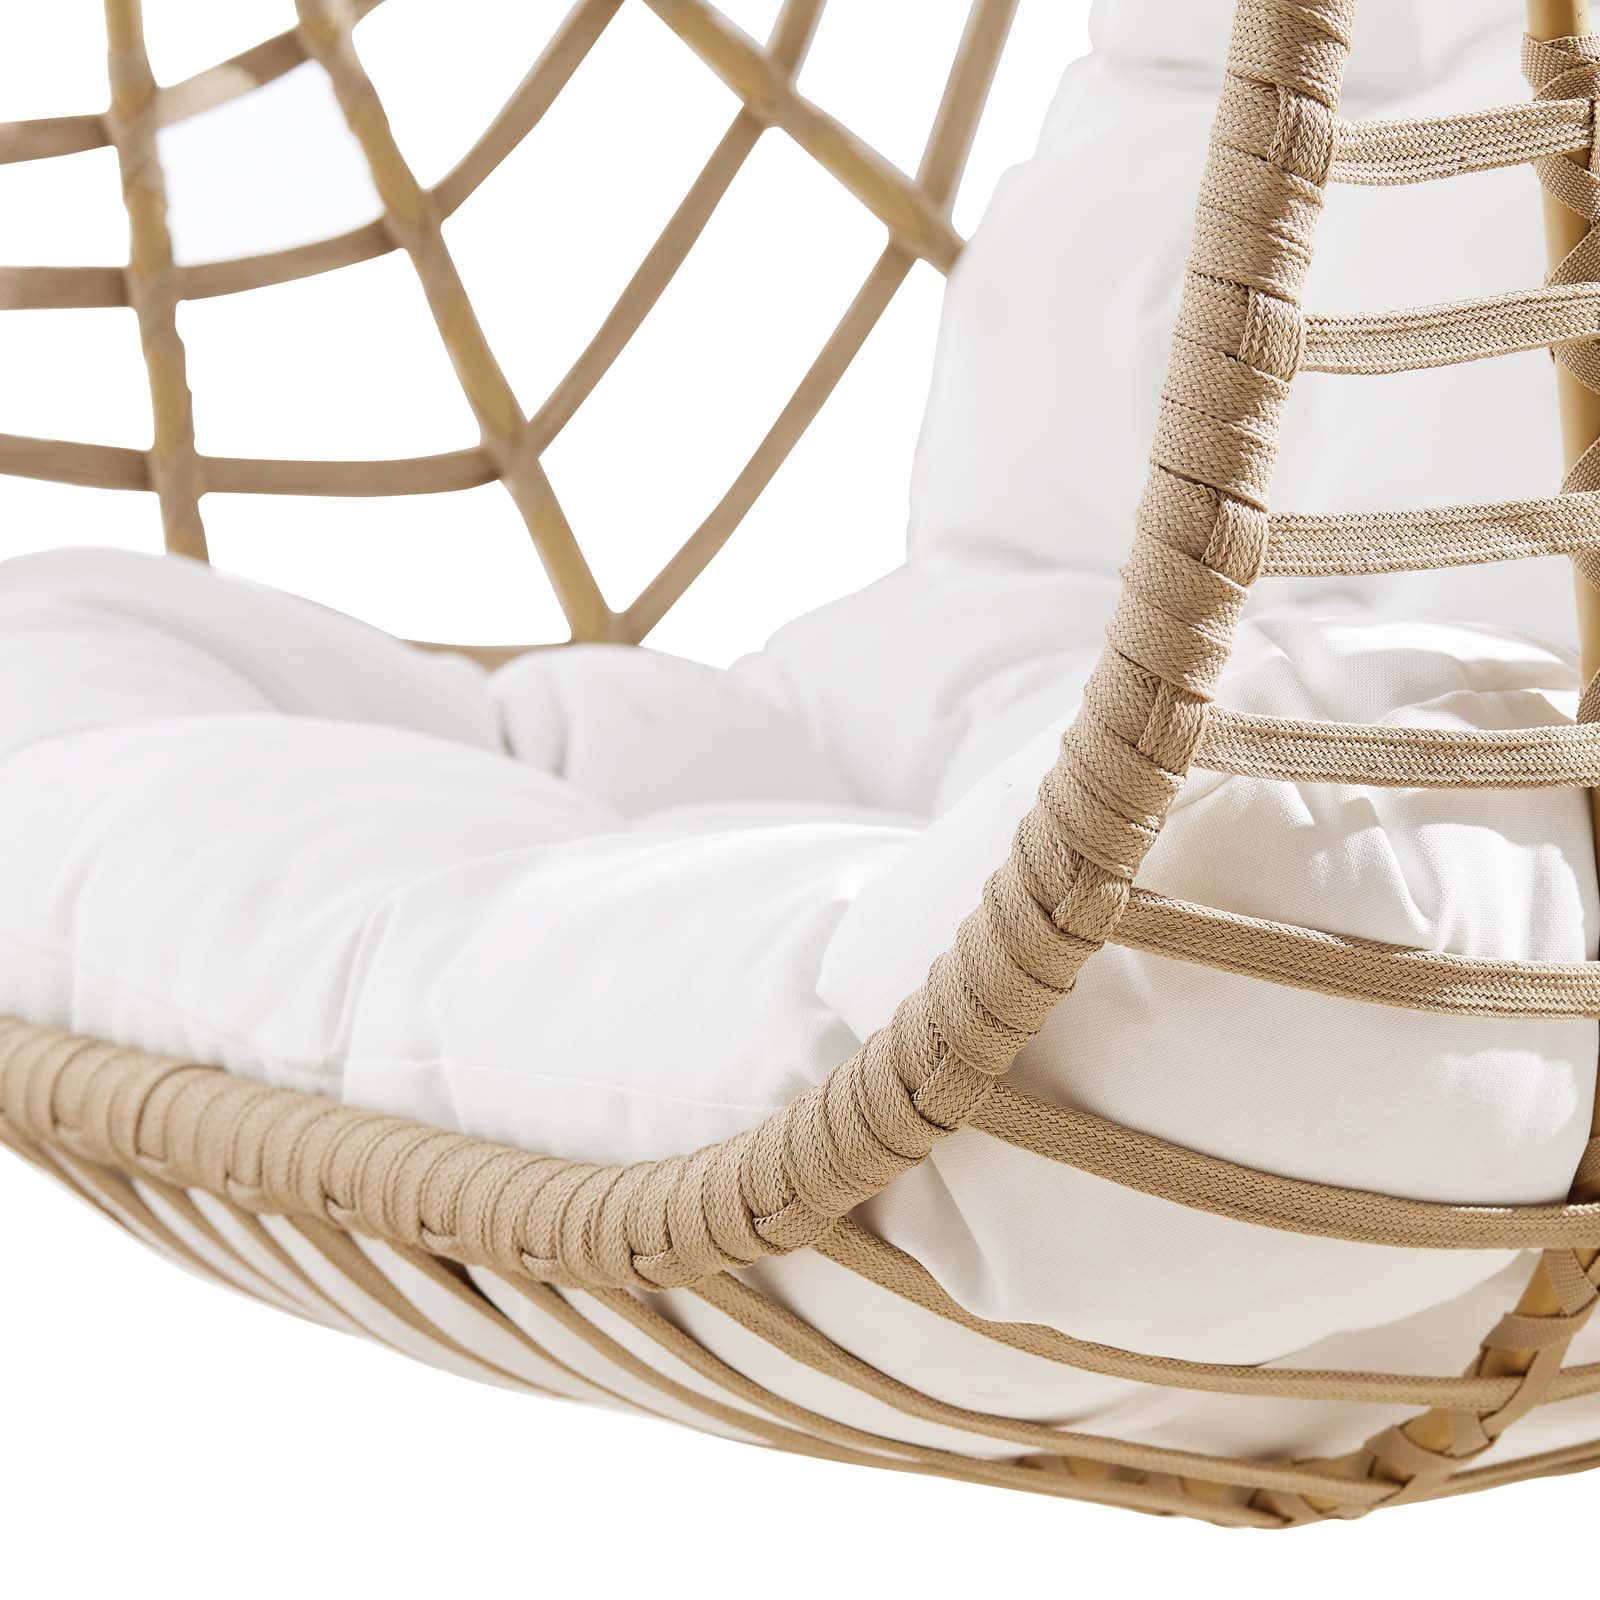 Amalie Wicker Rattan Outdoor Patio Rattan Swing Chair without Stand - East Shore Modern Home Furnishings